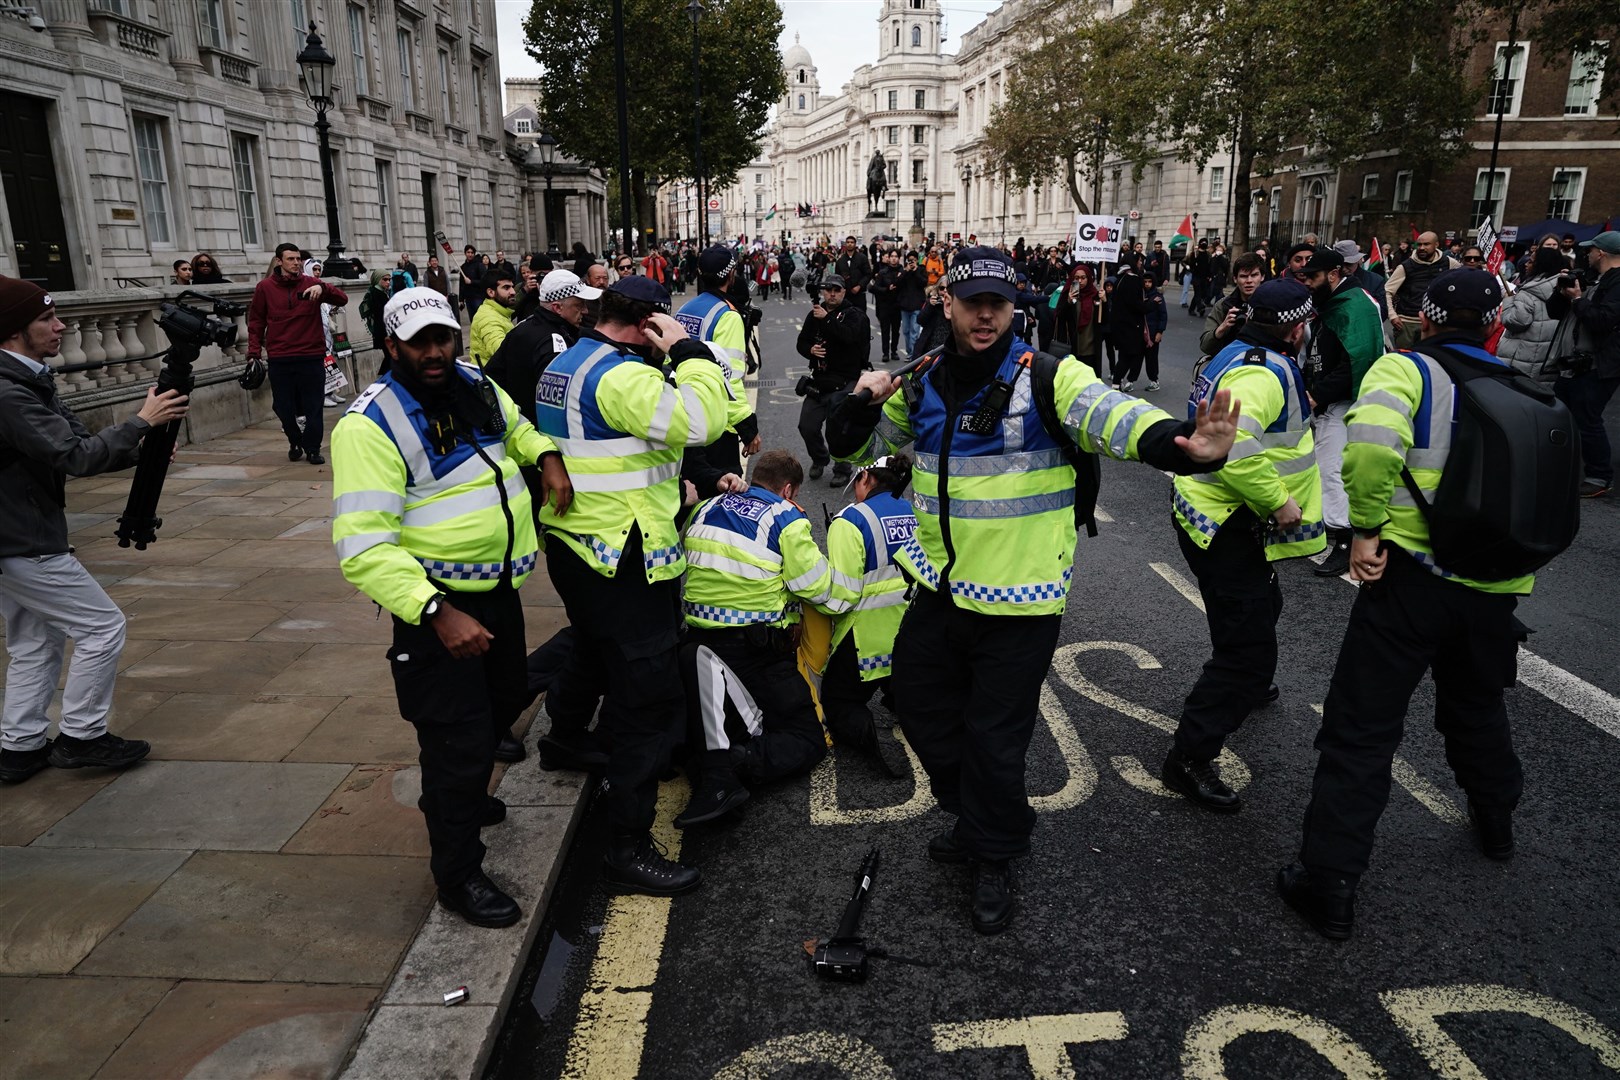 Police detain a man following scuffles between rival supporters near the Cenotaph in Whitehall during a pro-Palestine march (Jordan Pettitt PA)